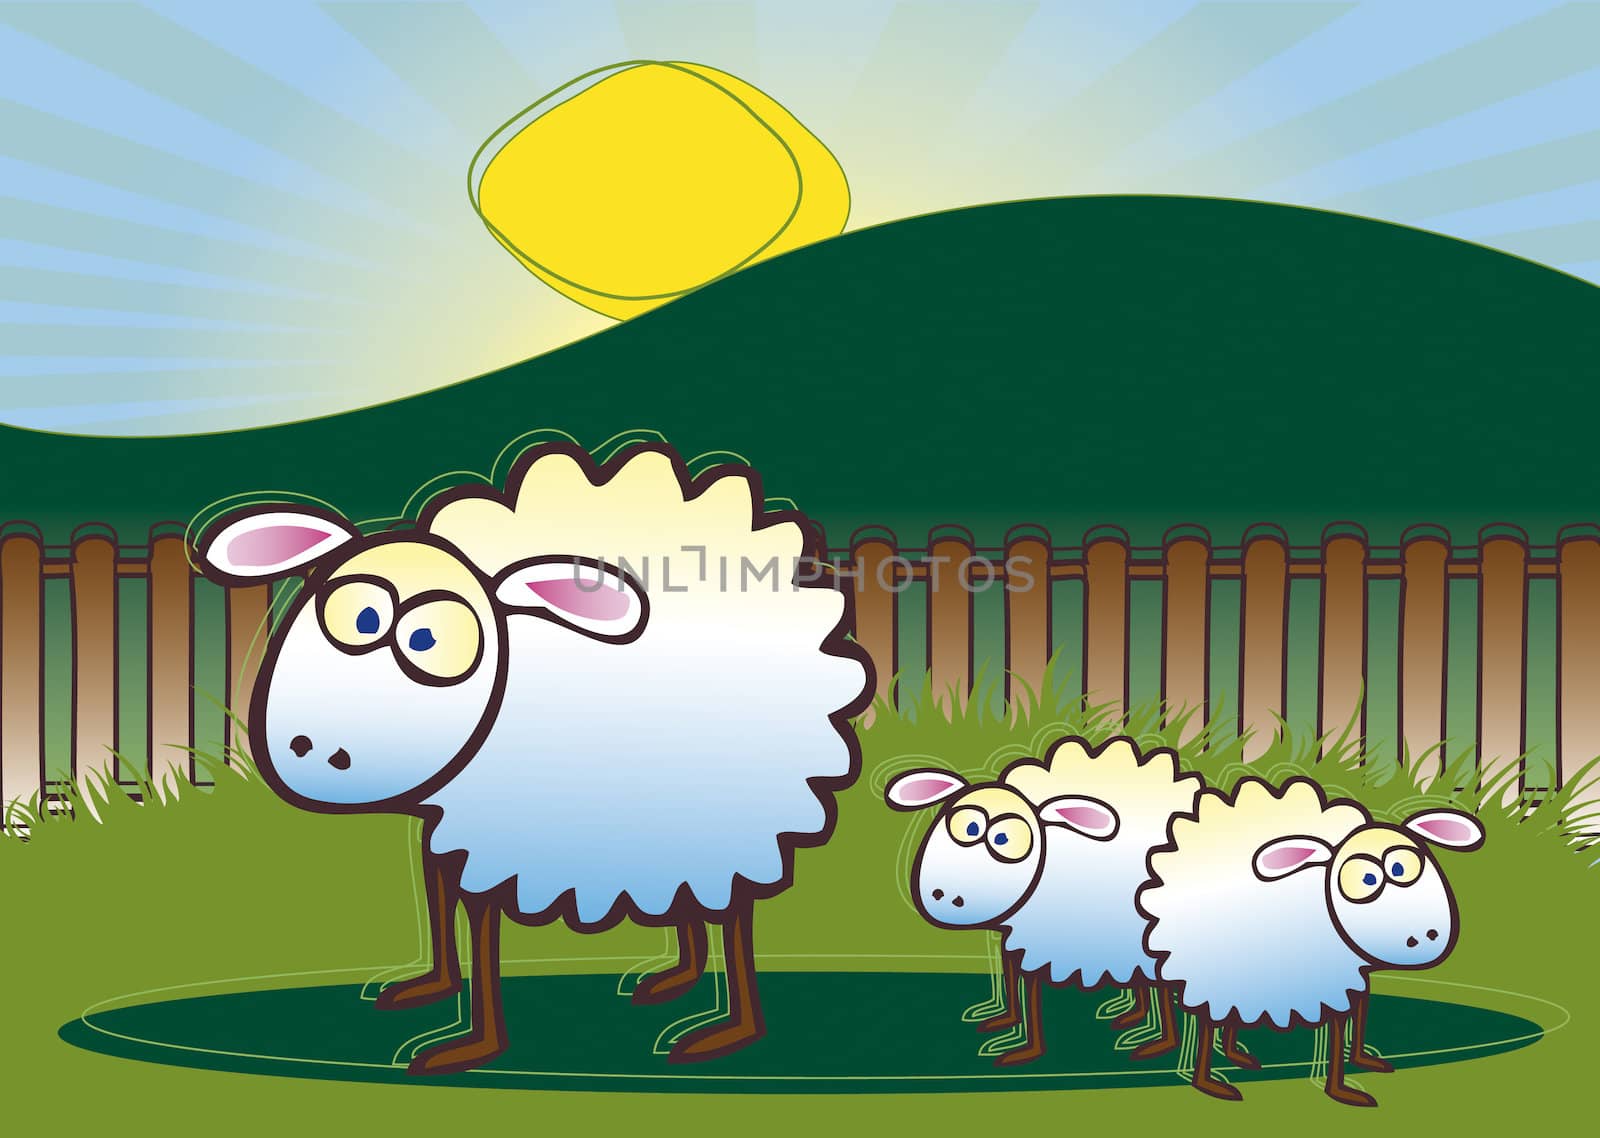 An illustration of a family of sheep consisting of a mother and two lambs set against a rural background with setting sun.